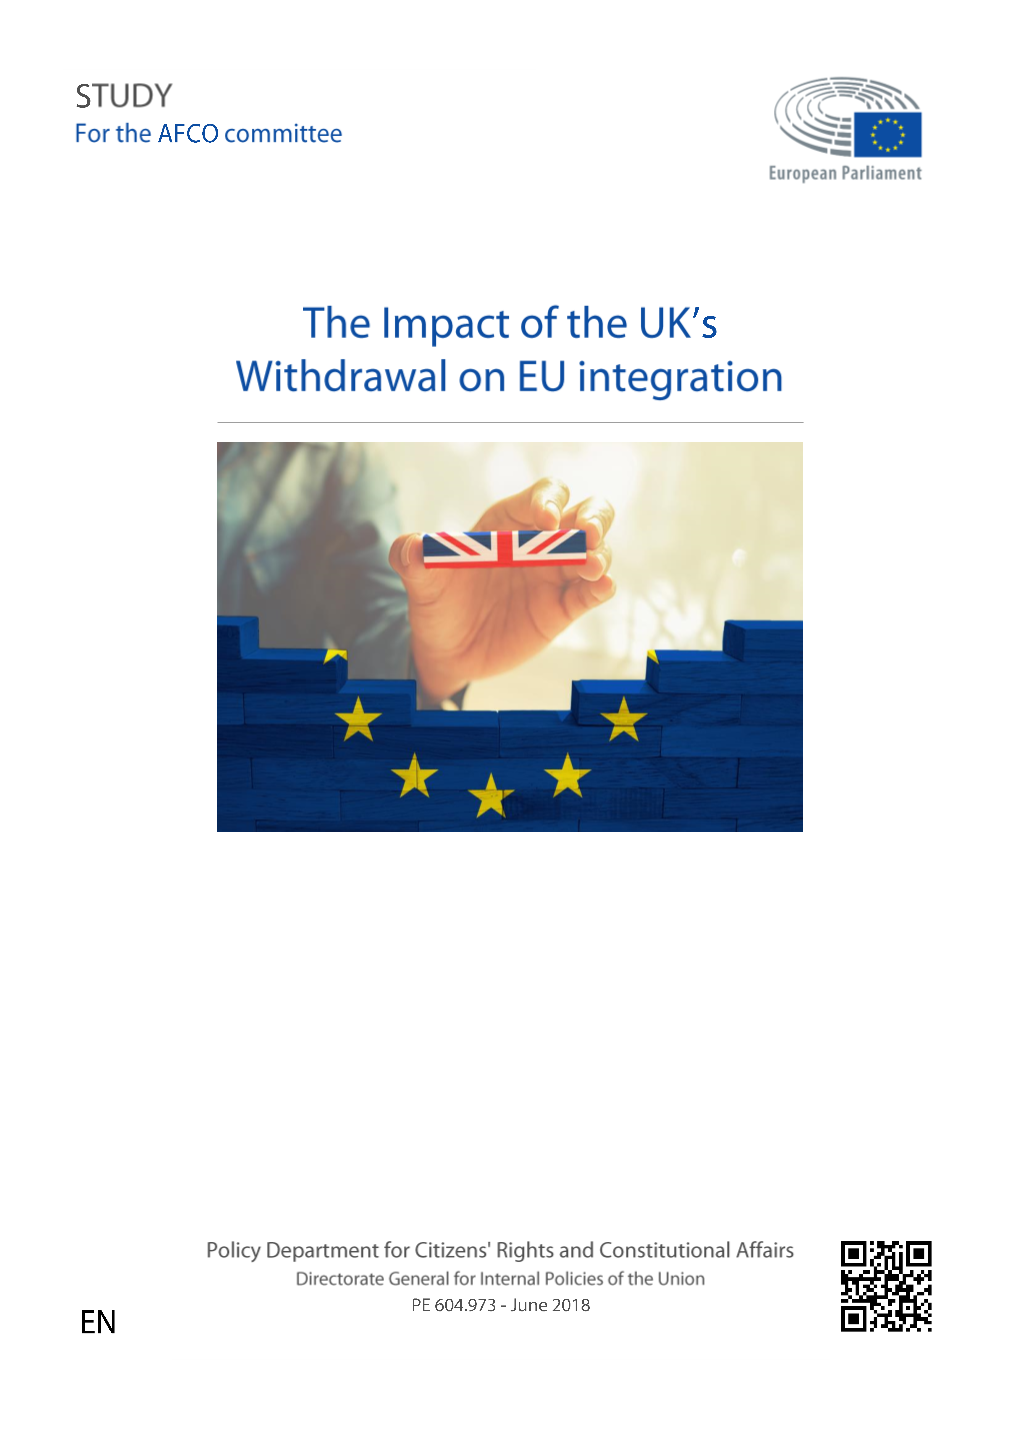 The Impact of the UK's Withdrawal on EU Integration